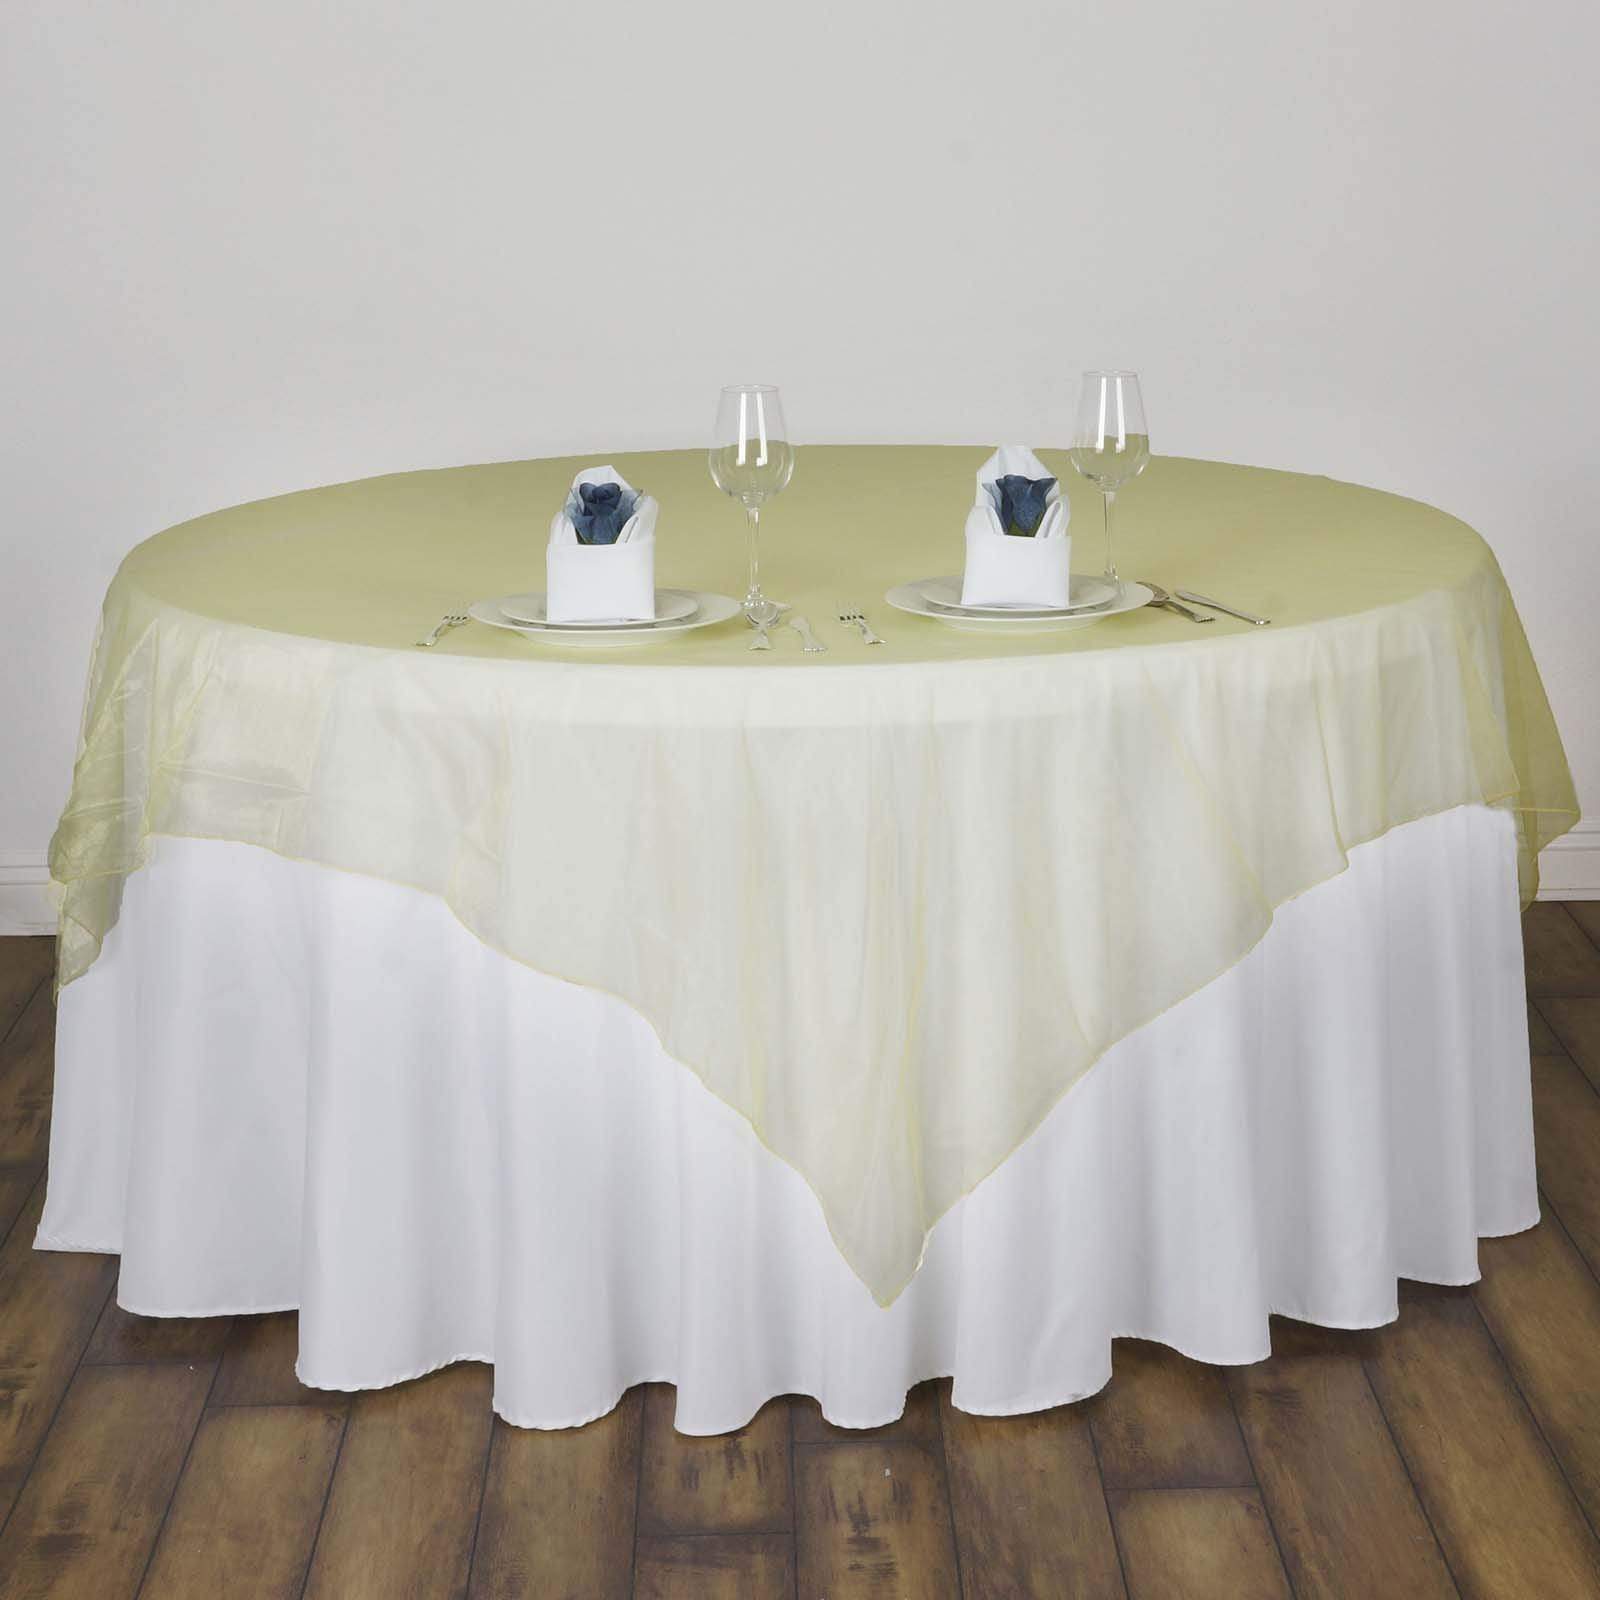 90 inch Square Organza Table Overlay